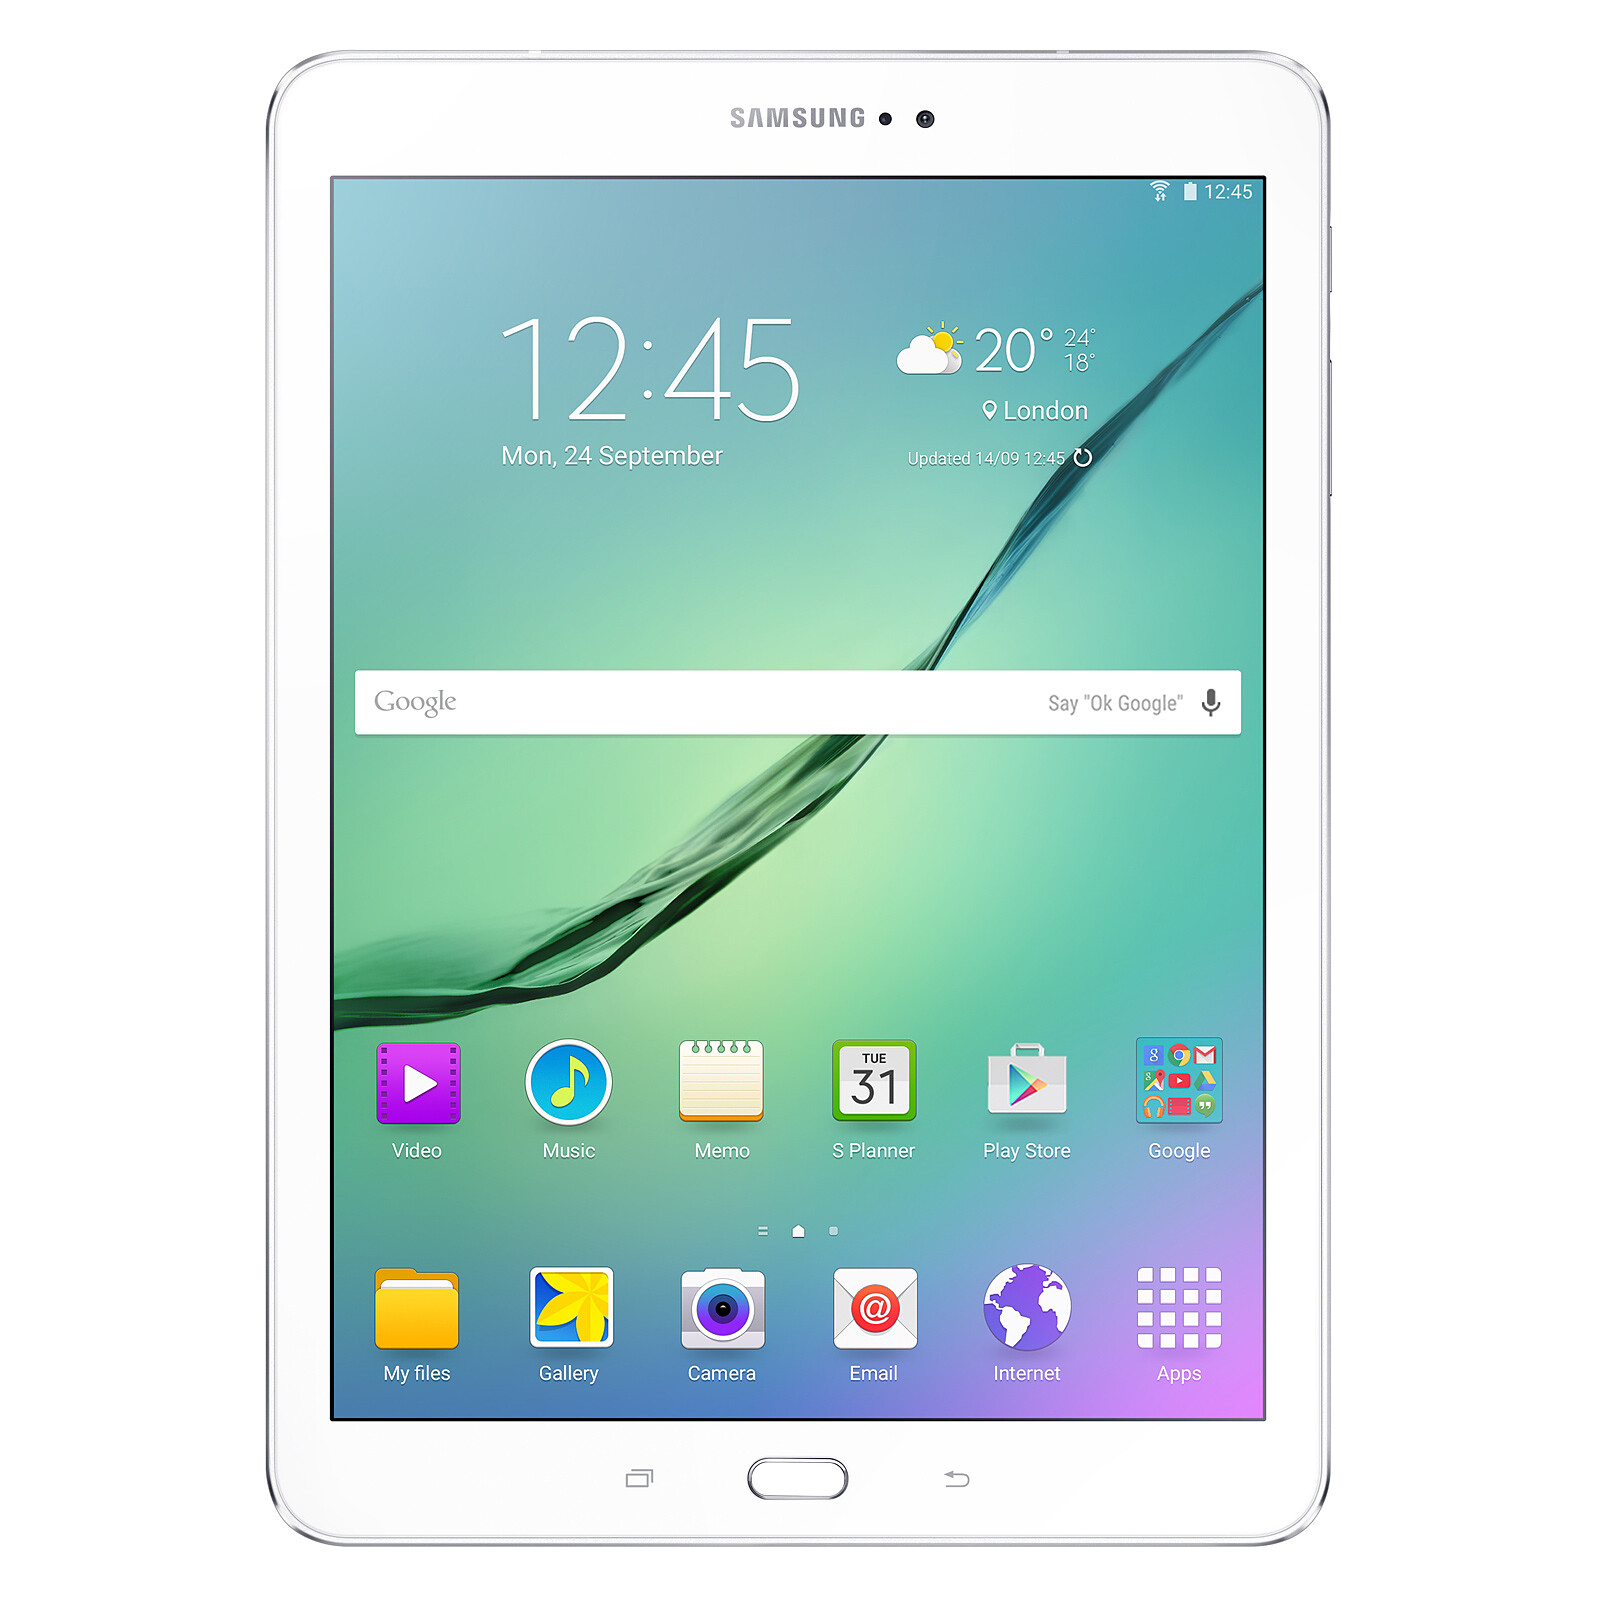 Tablette Tactile Samsung Galaxy TAB S2 - SM-T810 / SM-T813